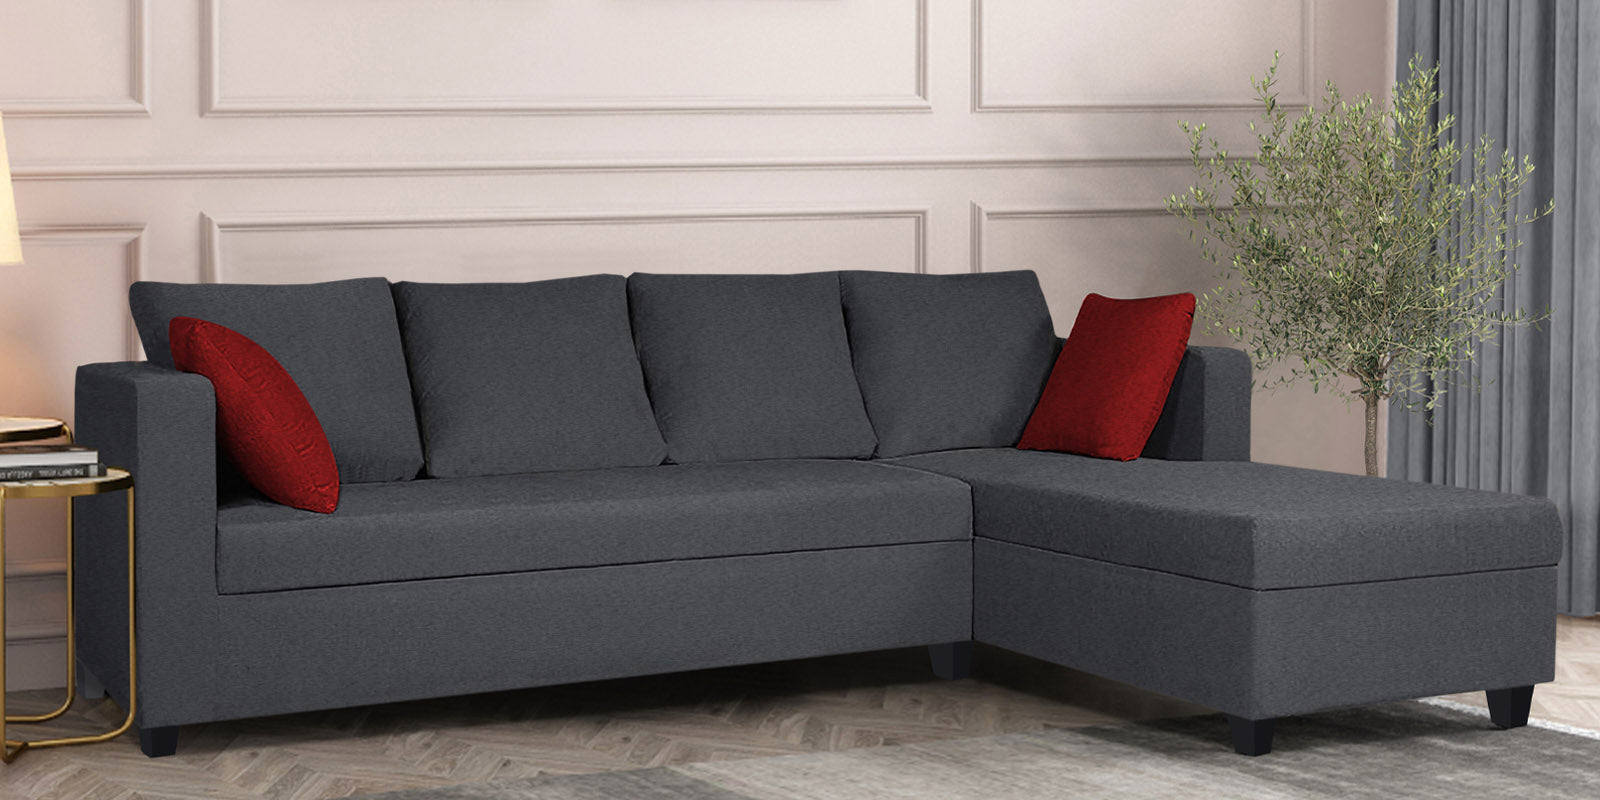 Nebula Fabric LHS Sectional Sofa (3+Lounger) in Charcoal Grey Colour